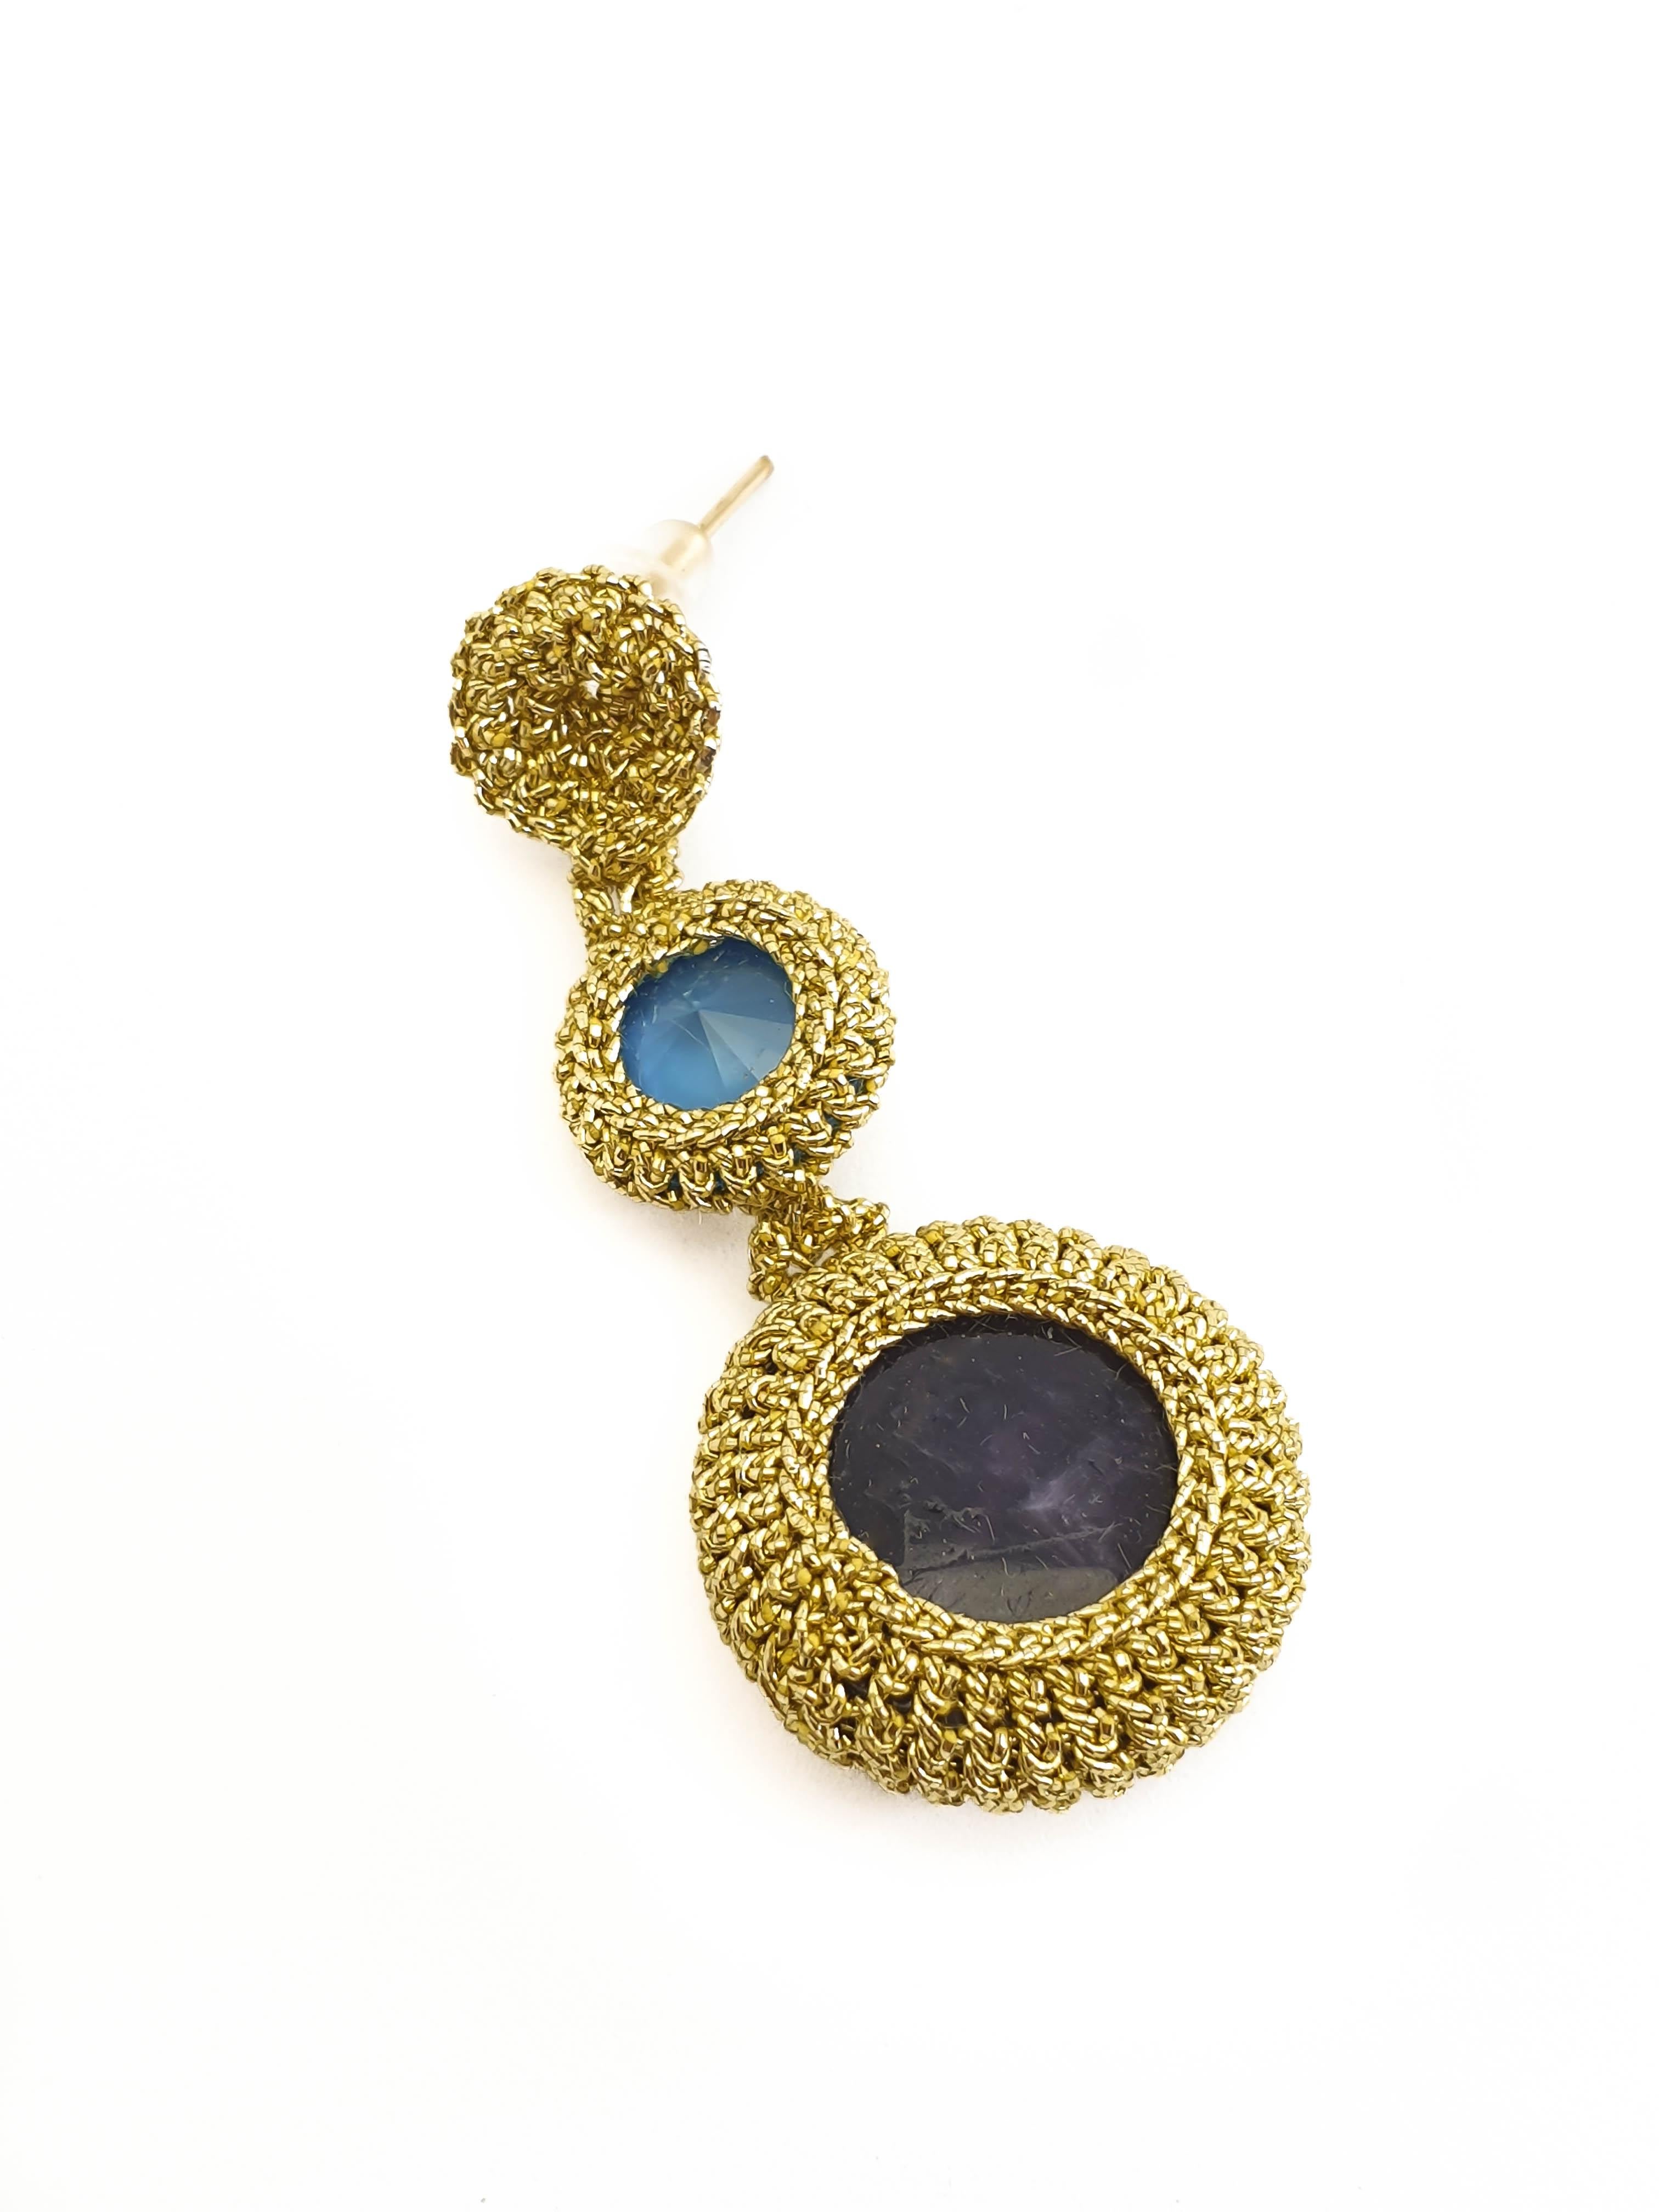 Fashionable, eye catching crochet earrings. Gold color thread tightly crochet around Natural Amethysts and vintage blue Swarovski  crystals.
These earrings can be custom made. Choice of stones can be altered.

The earrings are crochet with a smooth